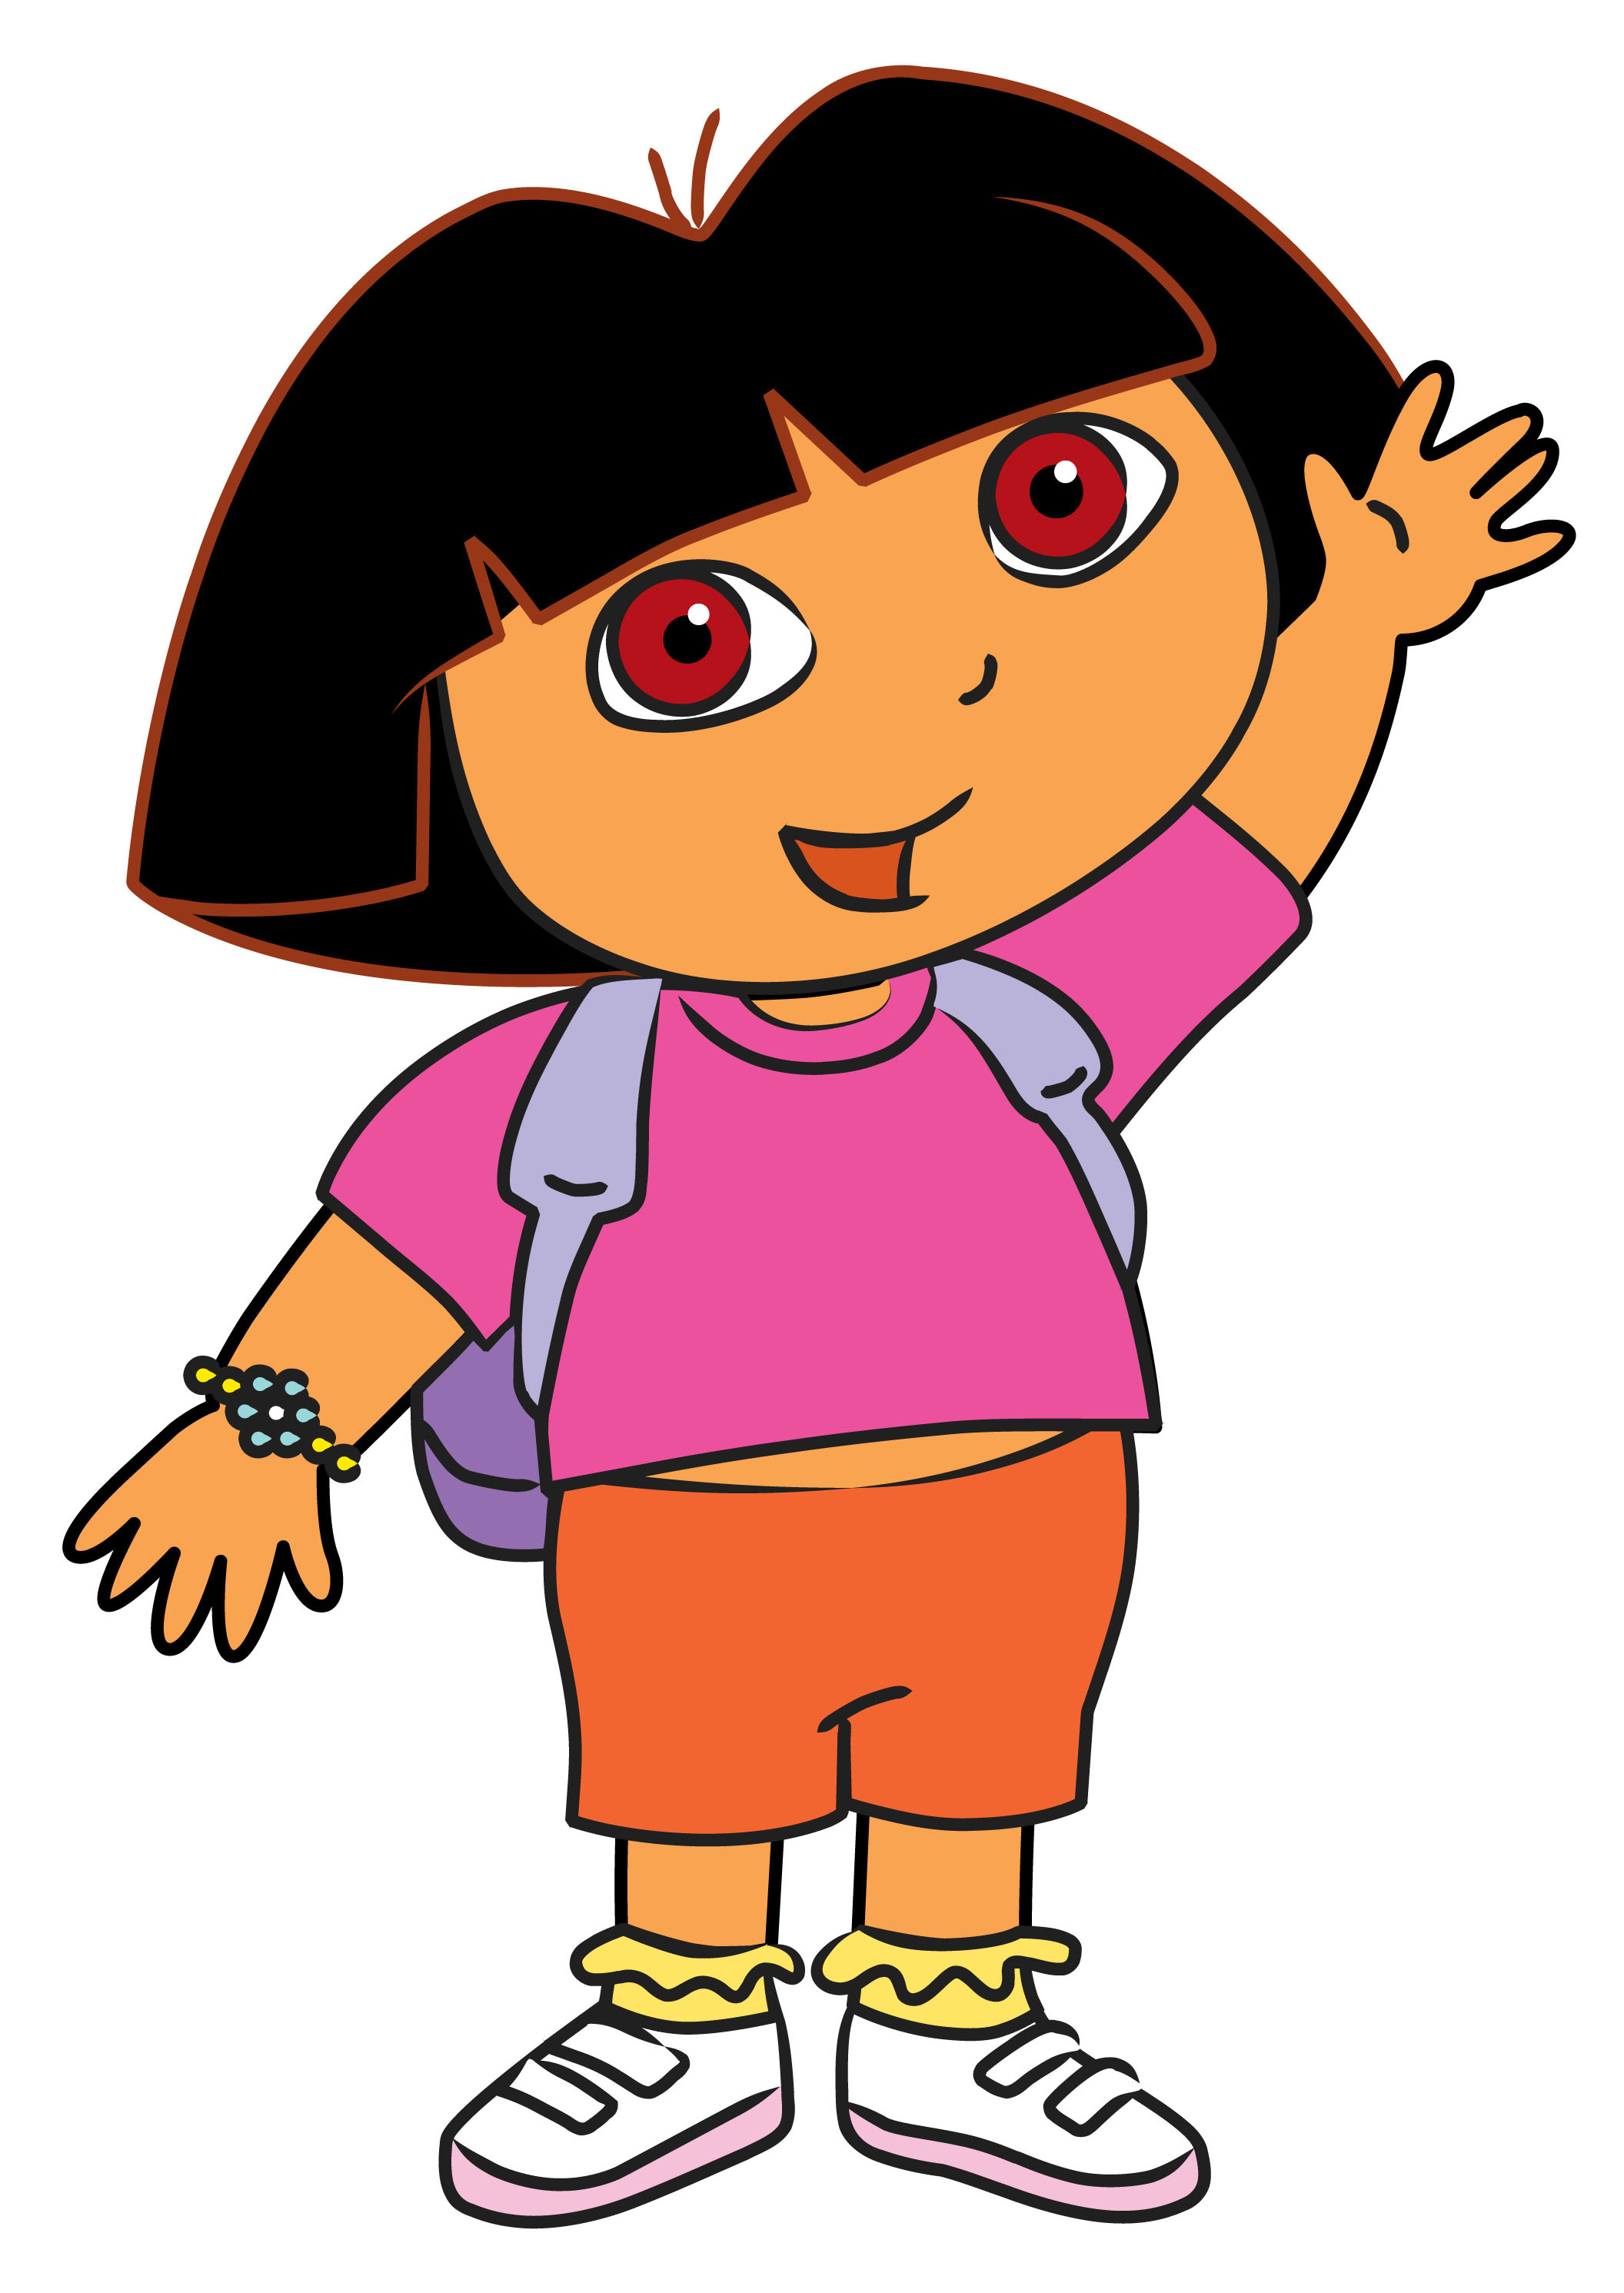 Dora the Explorer - Dora wears a beautiful dress long while Boots holds a  cup